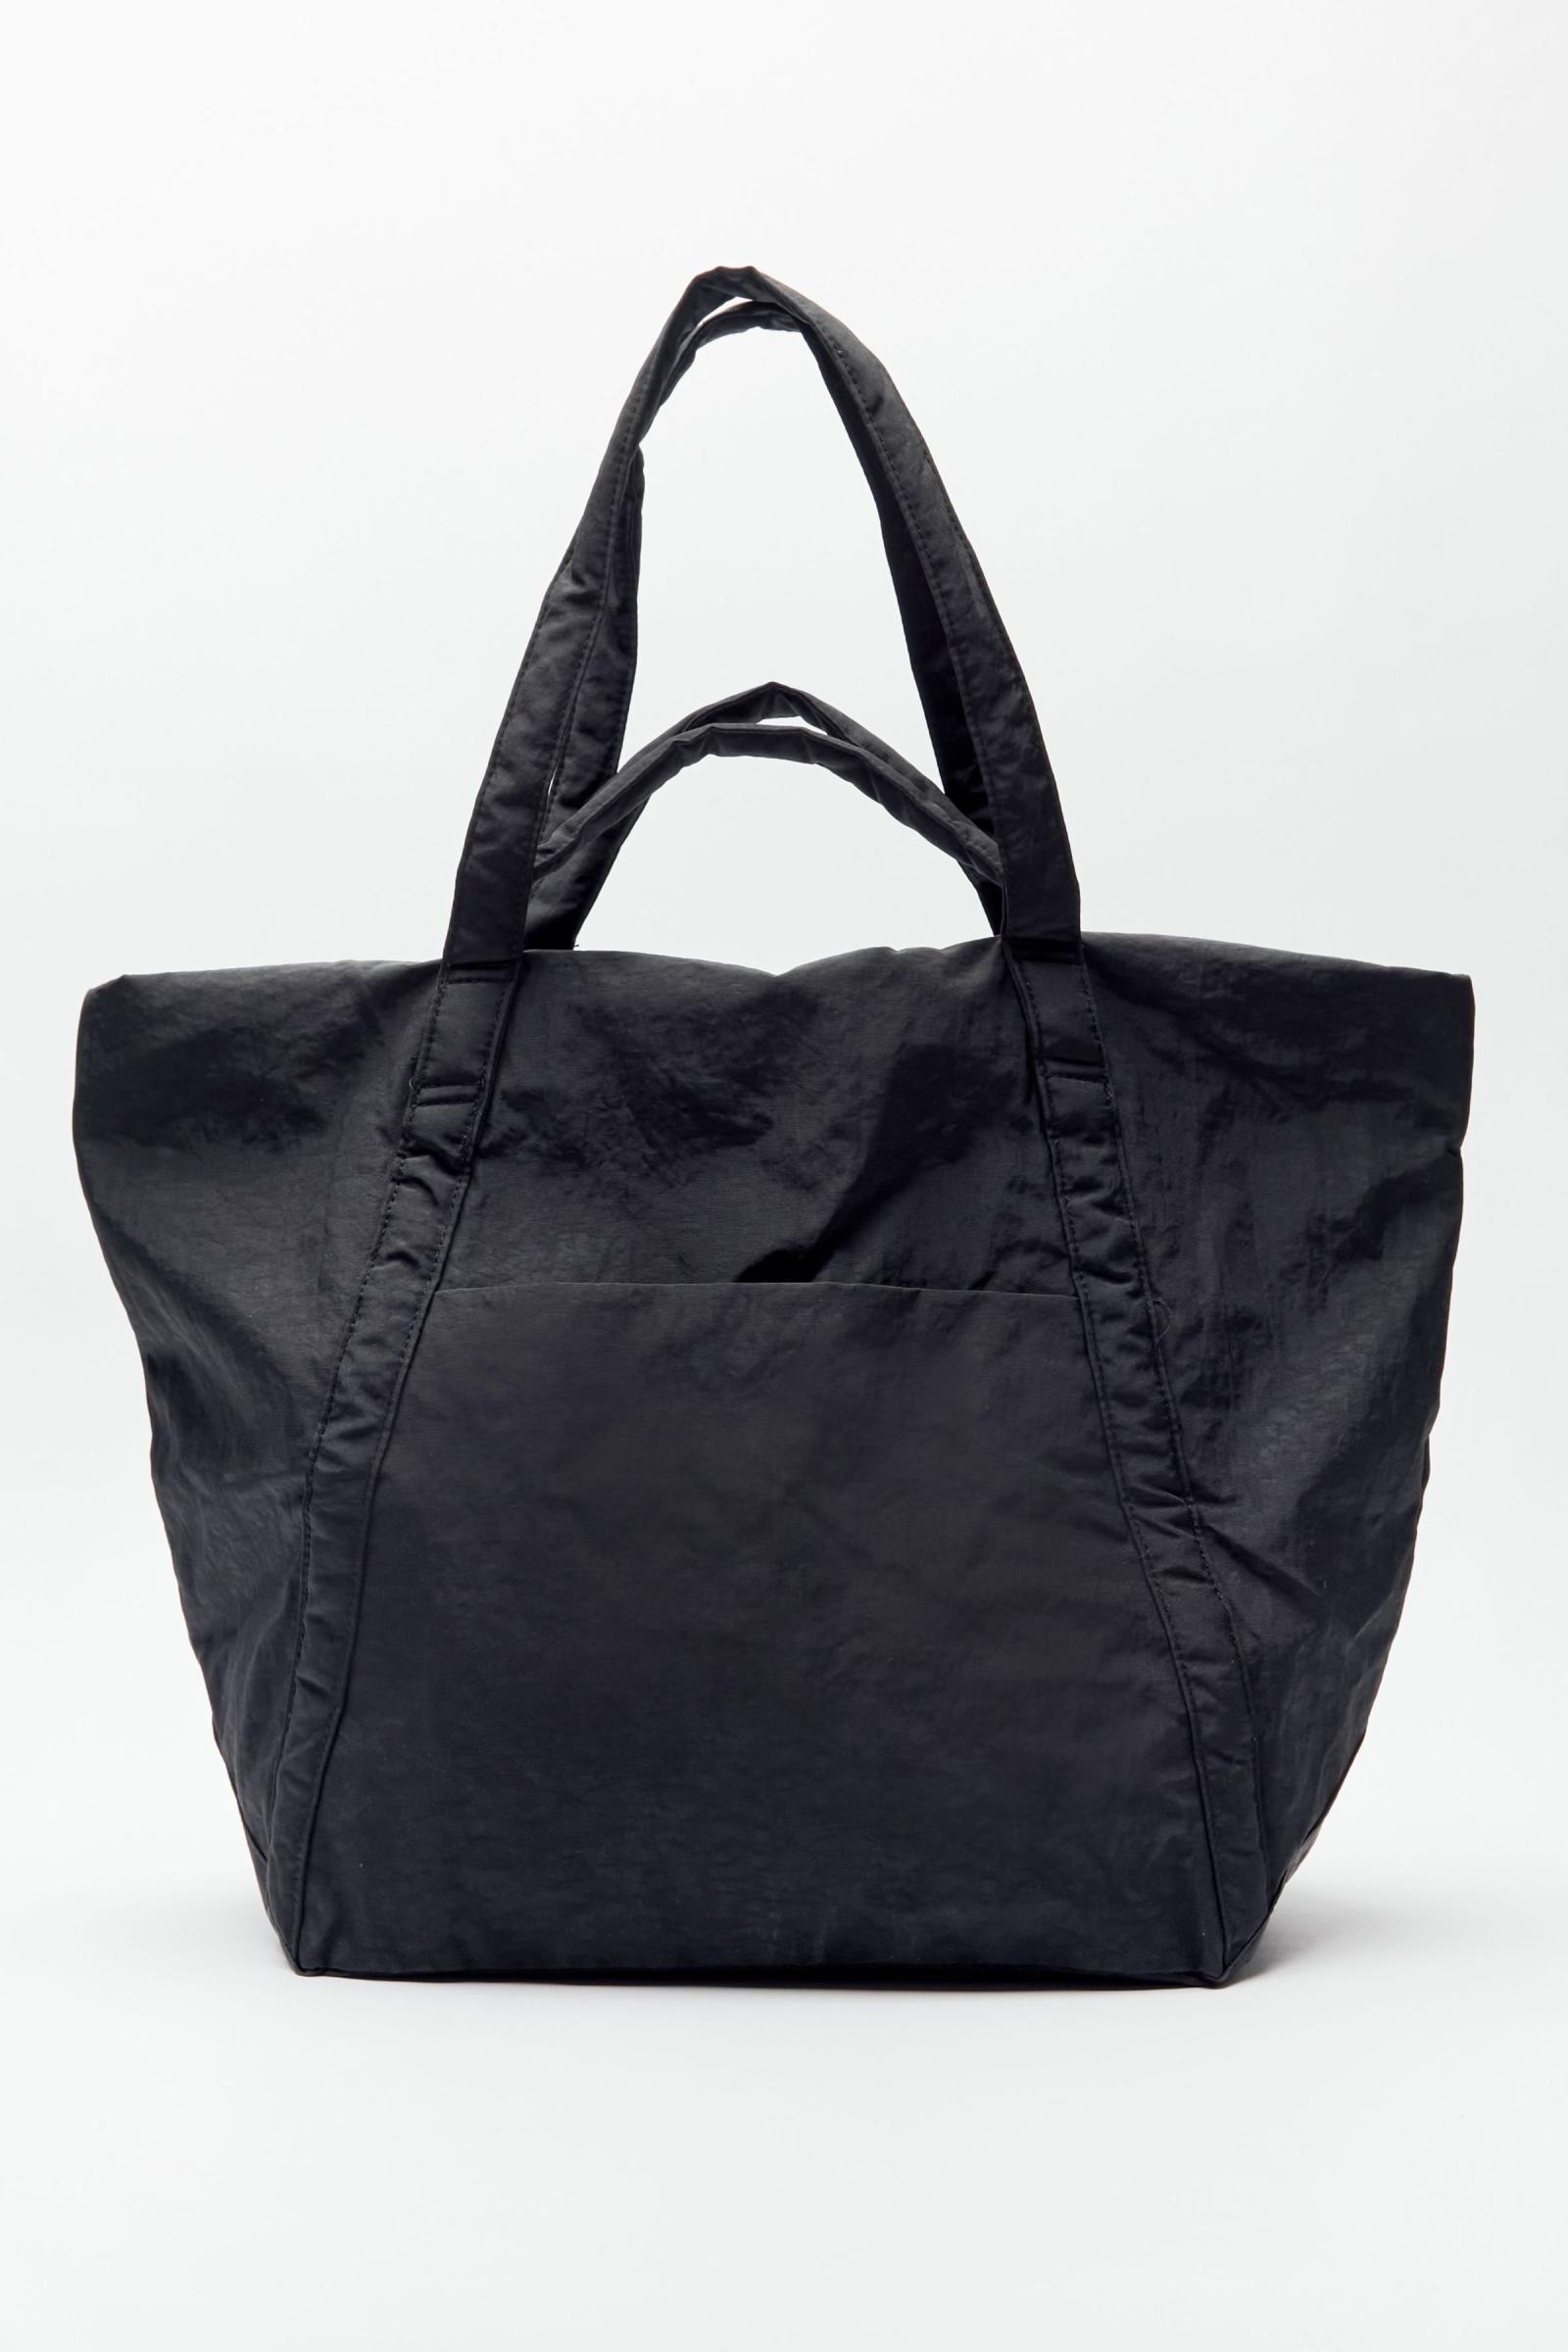 baggu_best bags for traveling_passerby magazine.jpeg